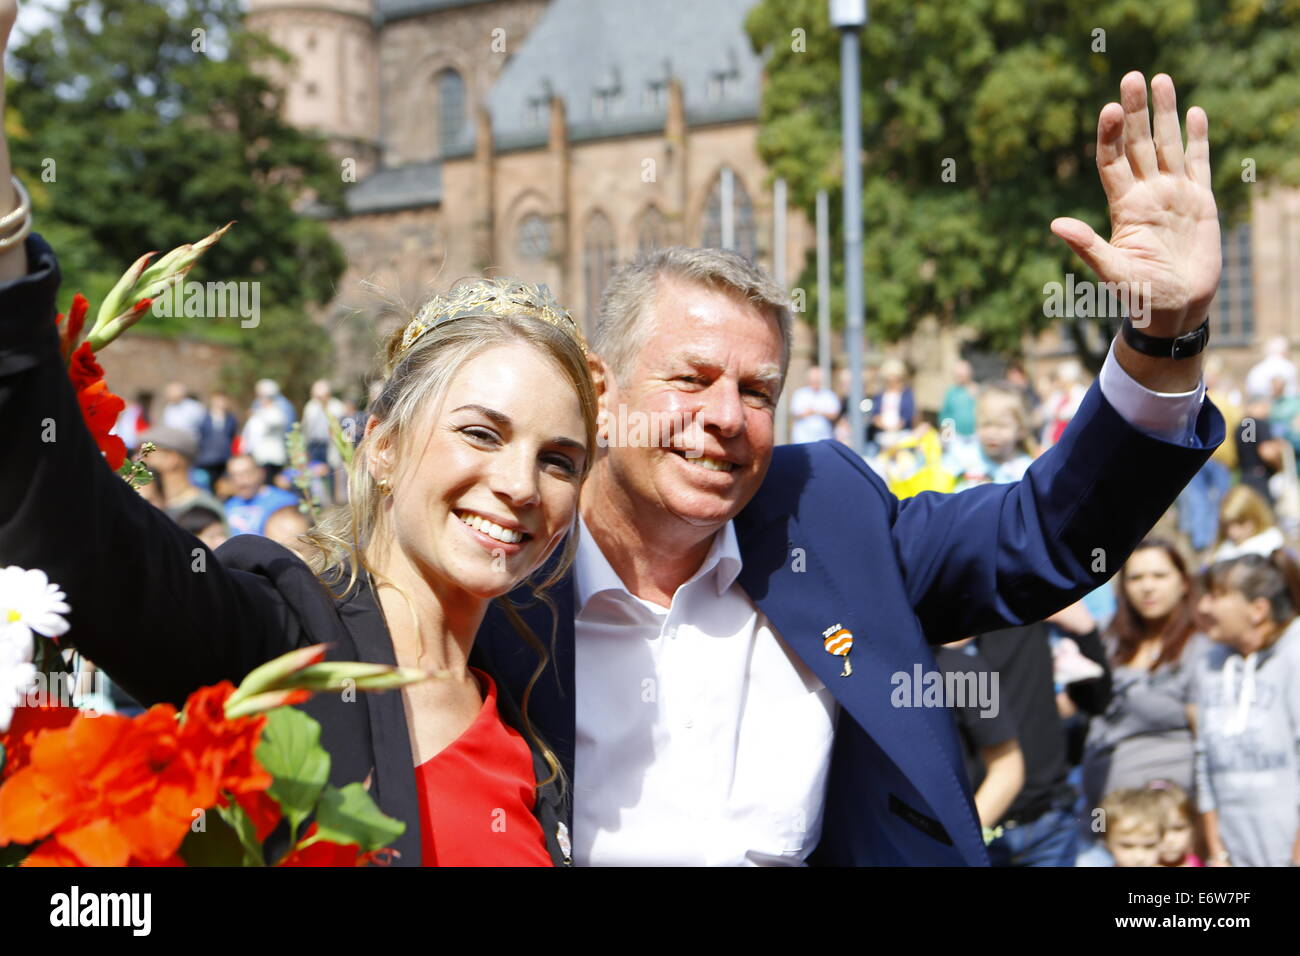 Worms, Germany. 31st Aug, 2014. The Rhine-Hessian wine queen, Judith Dorst (left), and the Lord Mayor of Worms, Michael Kissel (right), wave at the crowd. The first highlight of this year's Backfischfest was the big parade through the city of Worms with 125 groups and floats. Community groups, sport clubs, music groups and business from Worms and further afield took part. © Michael Debets/Pacific Press/Alamy Live News Stock Photo